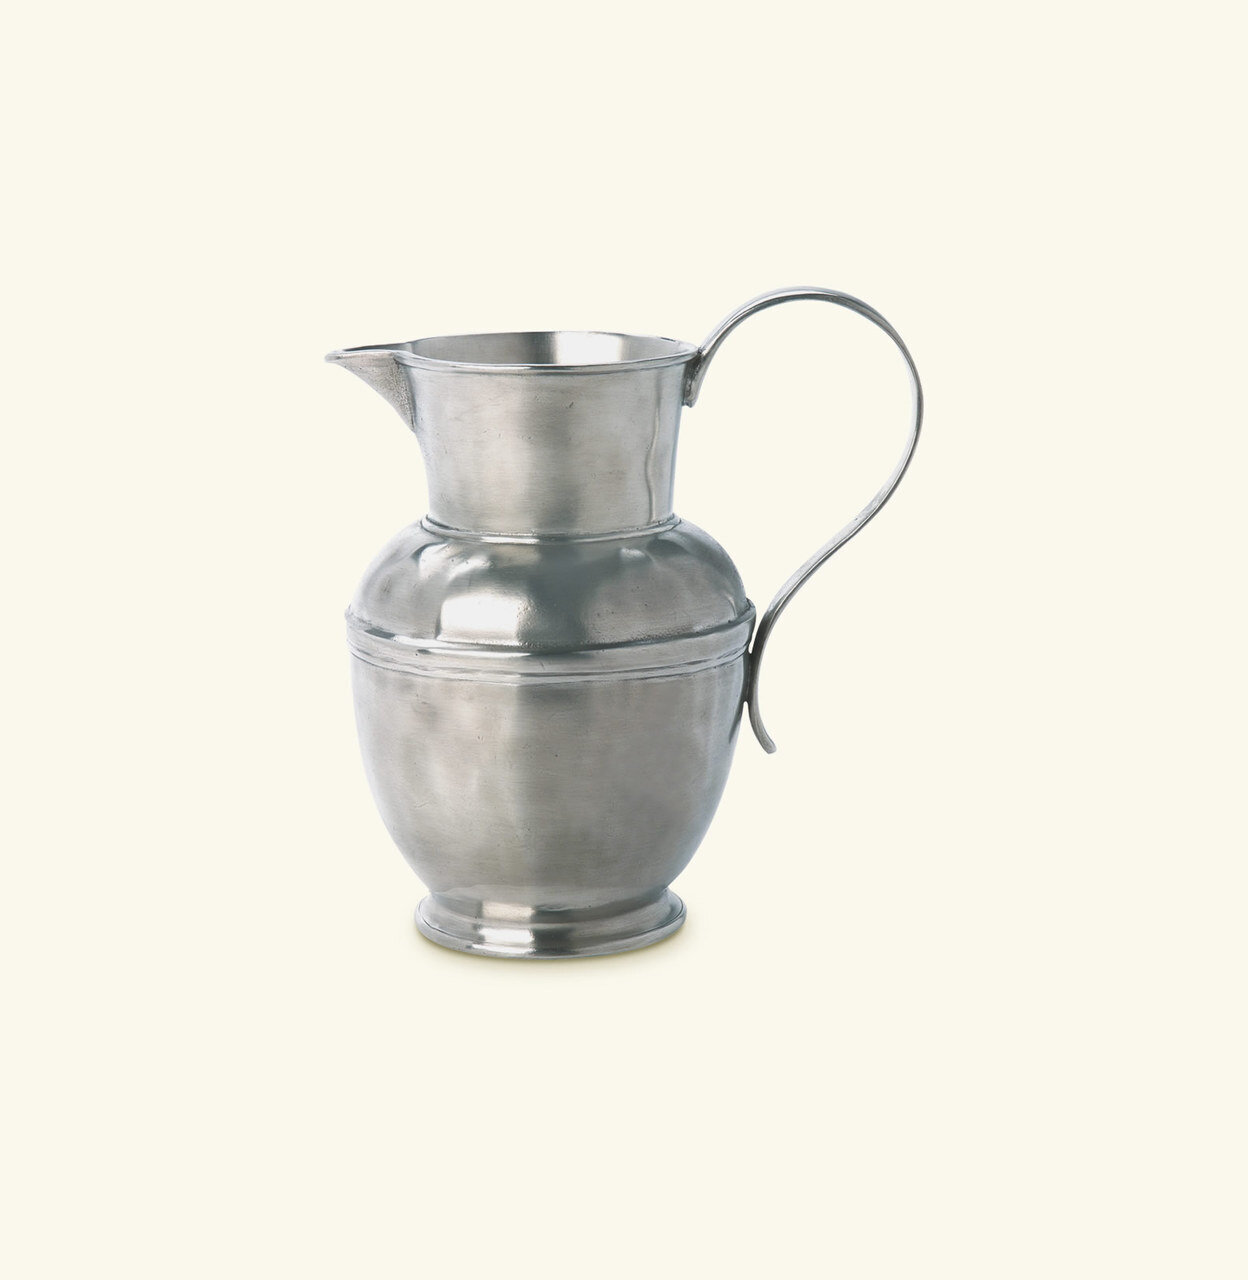 Match Pewter Water Pitcher a428.0